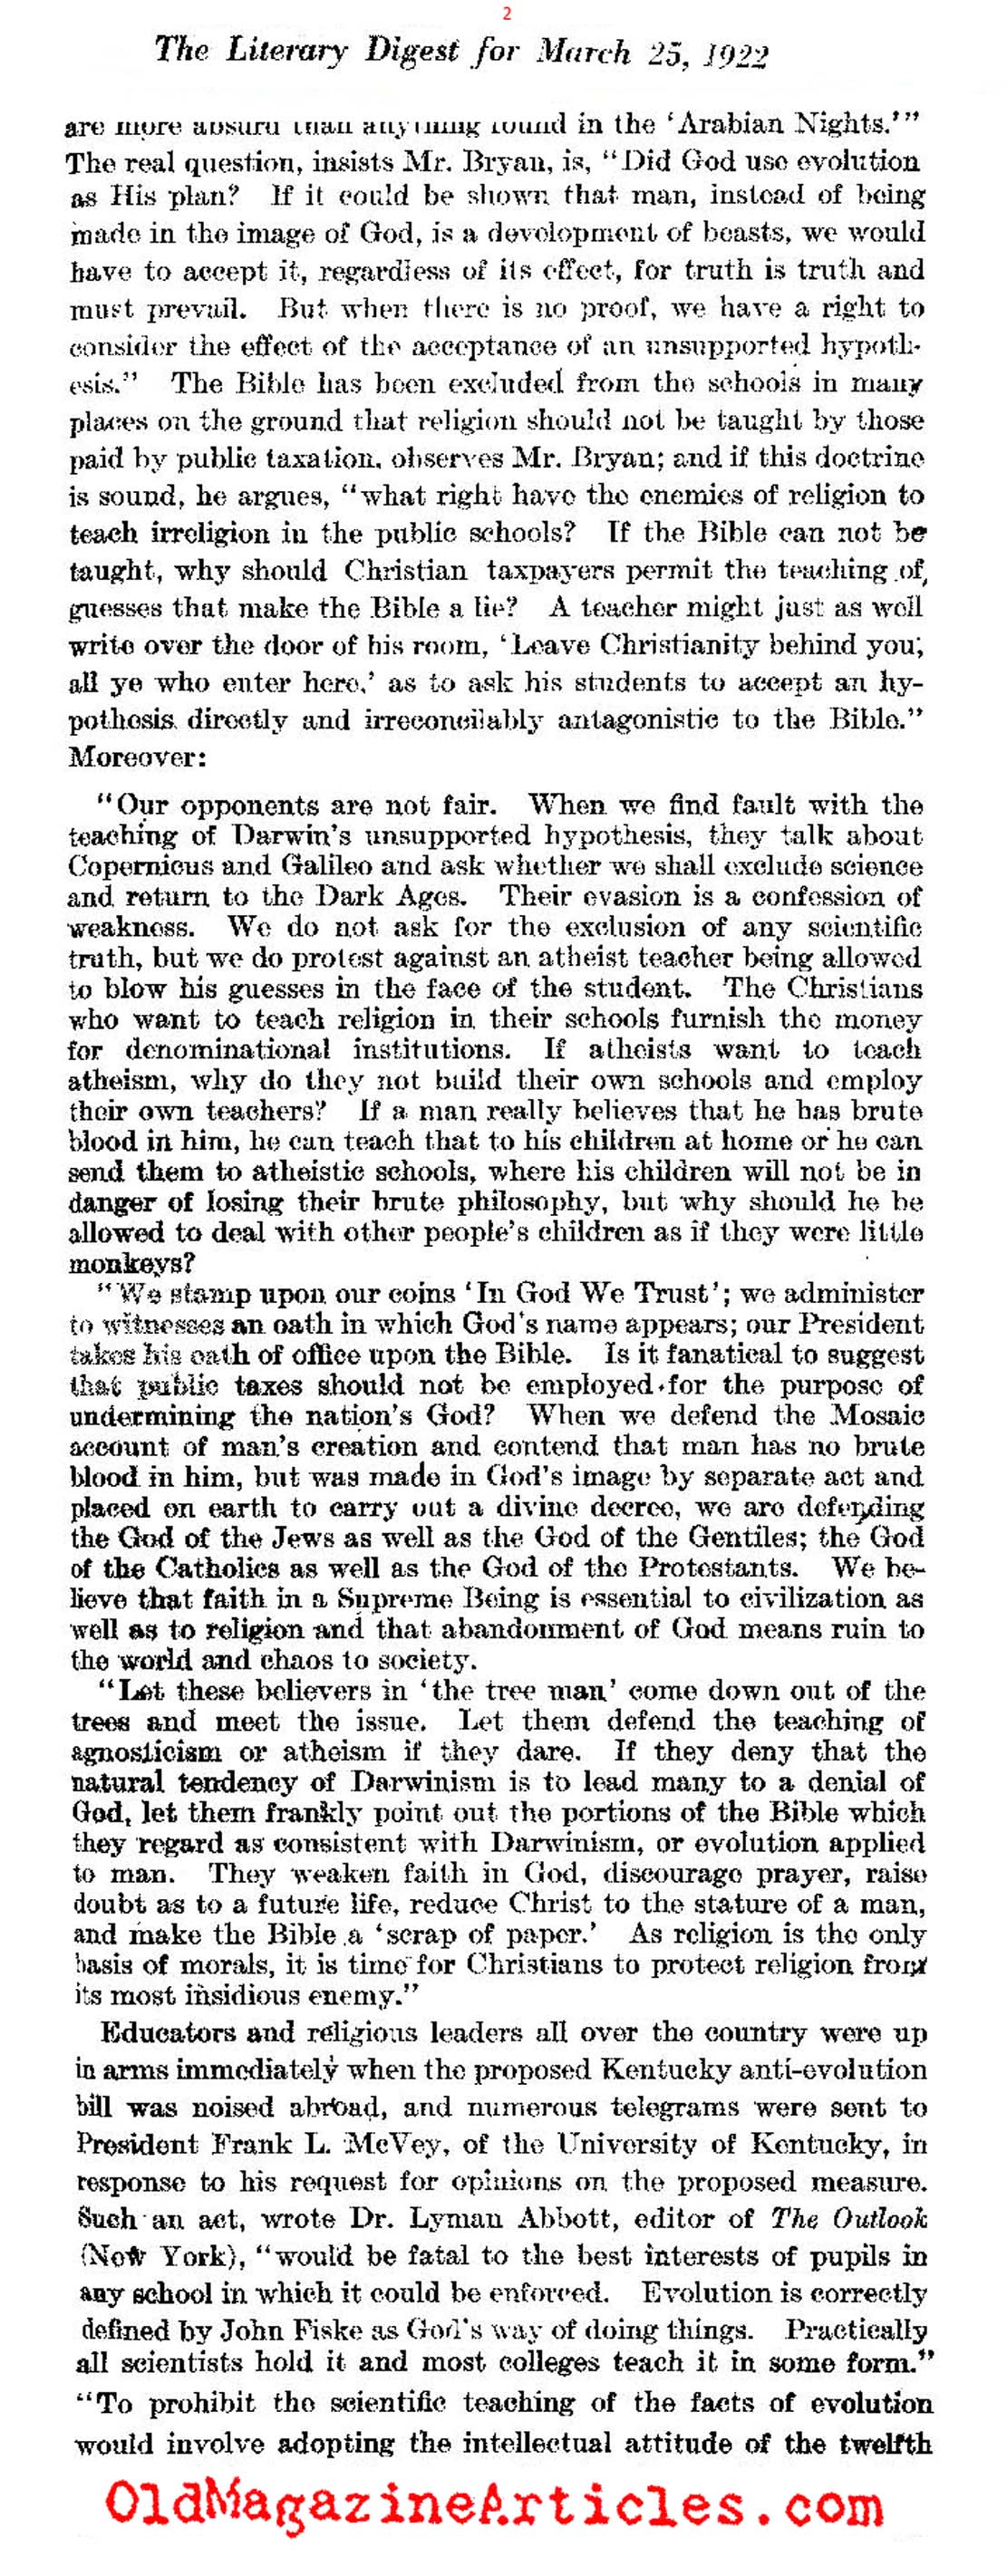 Charles Darwin in the Schools  (The Literary Digest, 1922)